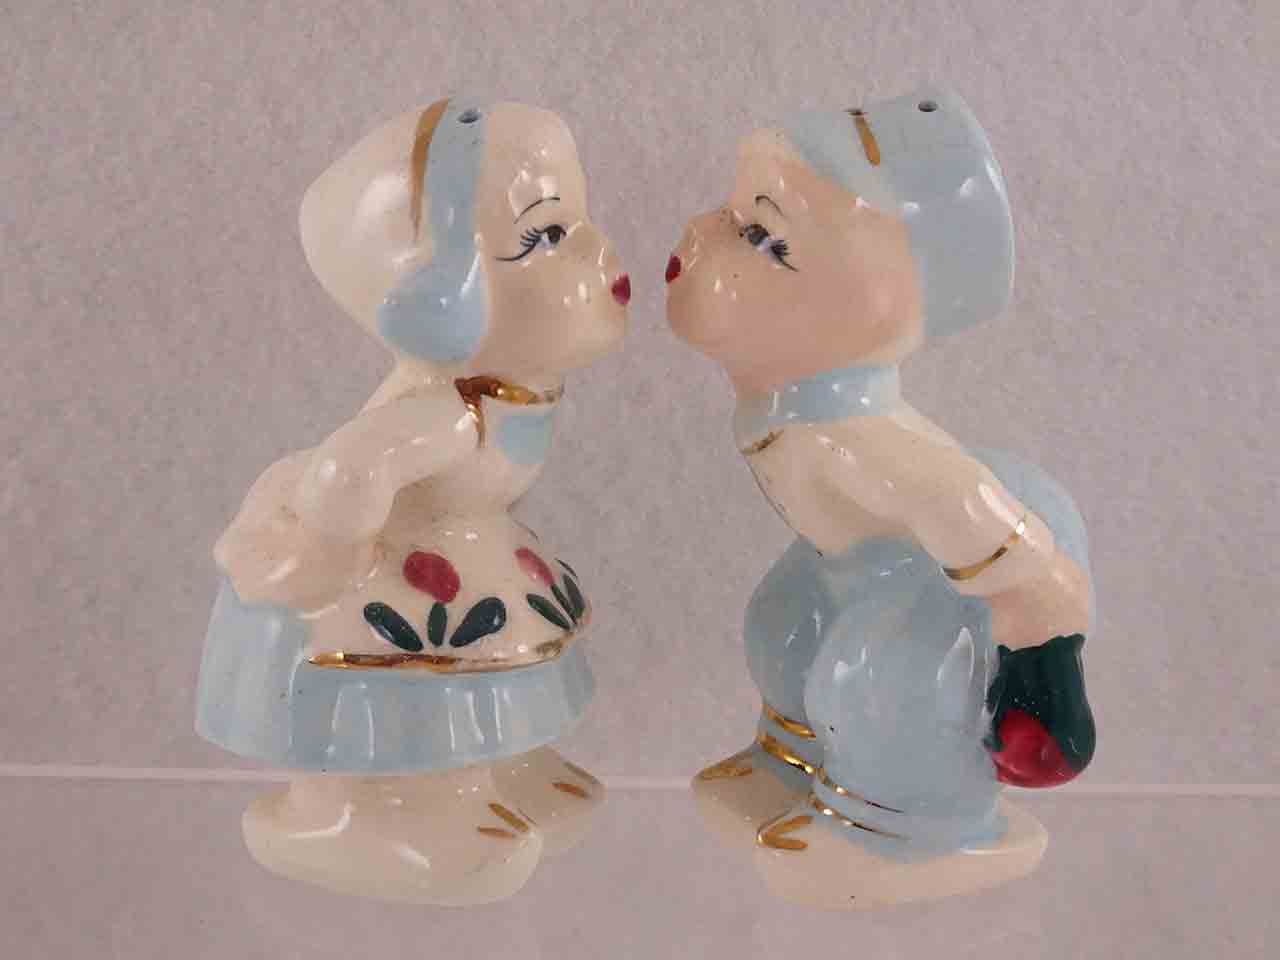 Napco kissing Dutch (Holland) couple salt and pepper shakers